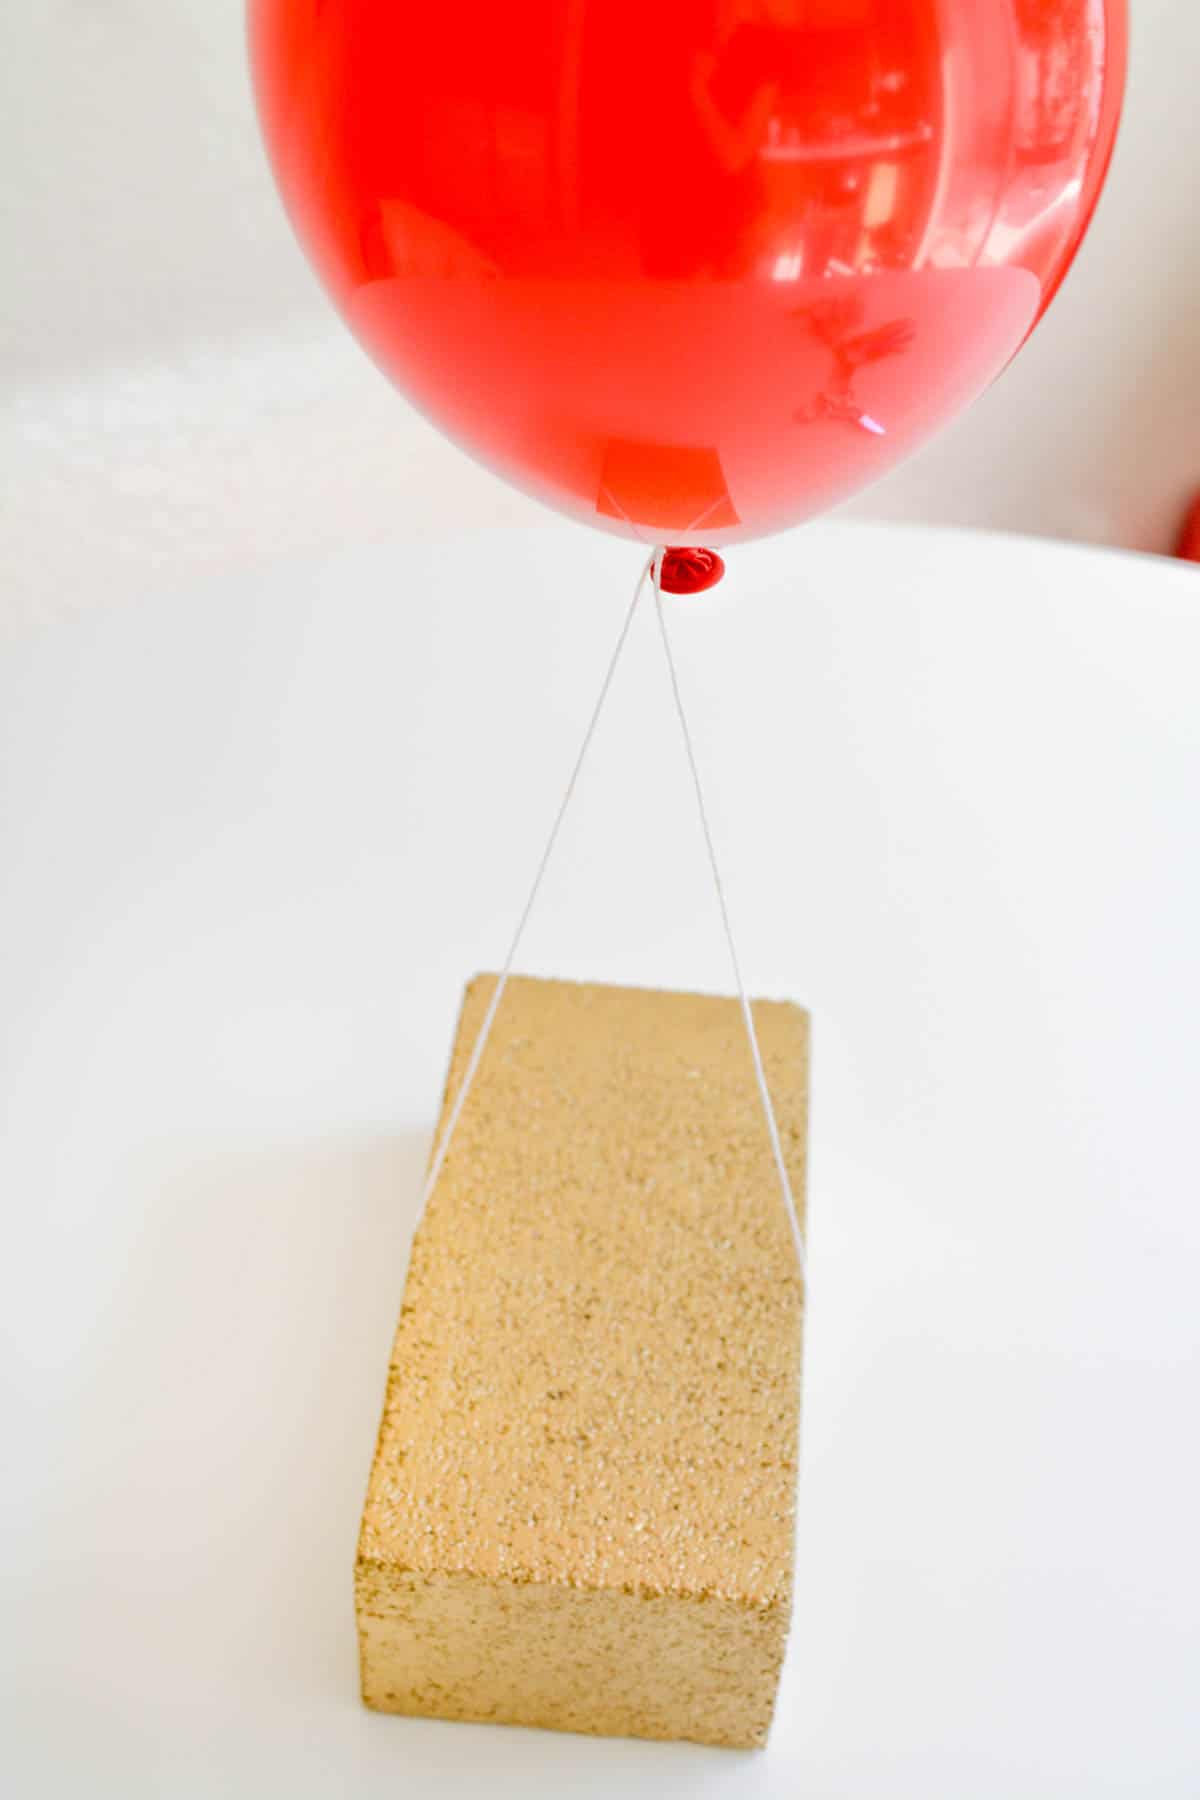 A gold brick holding a red balloon on white string.